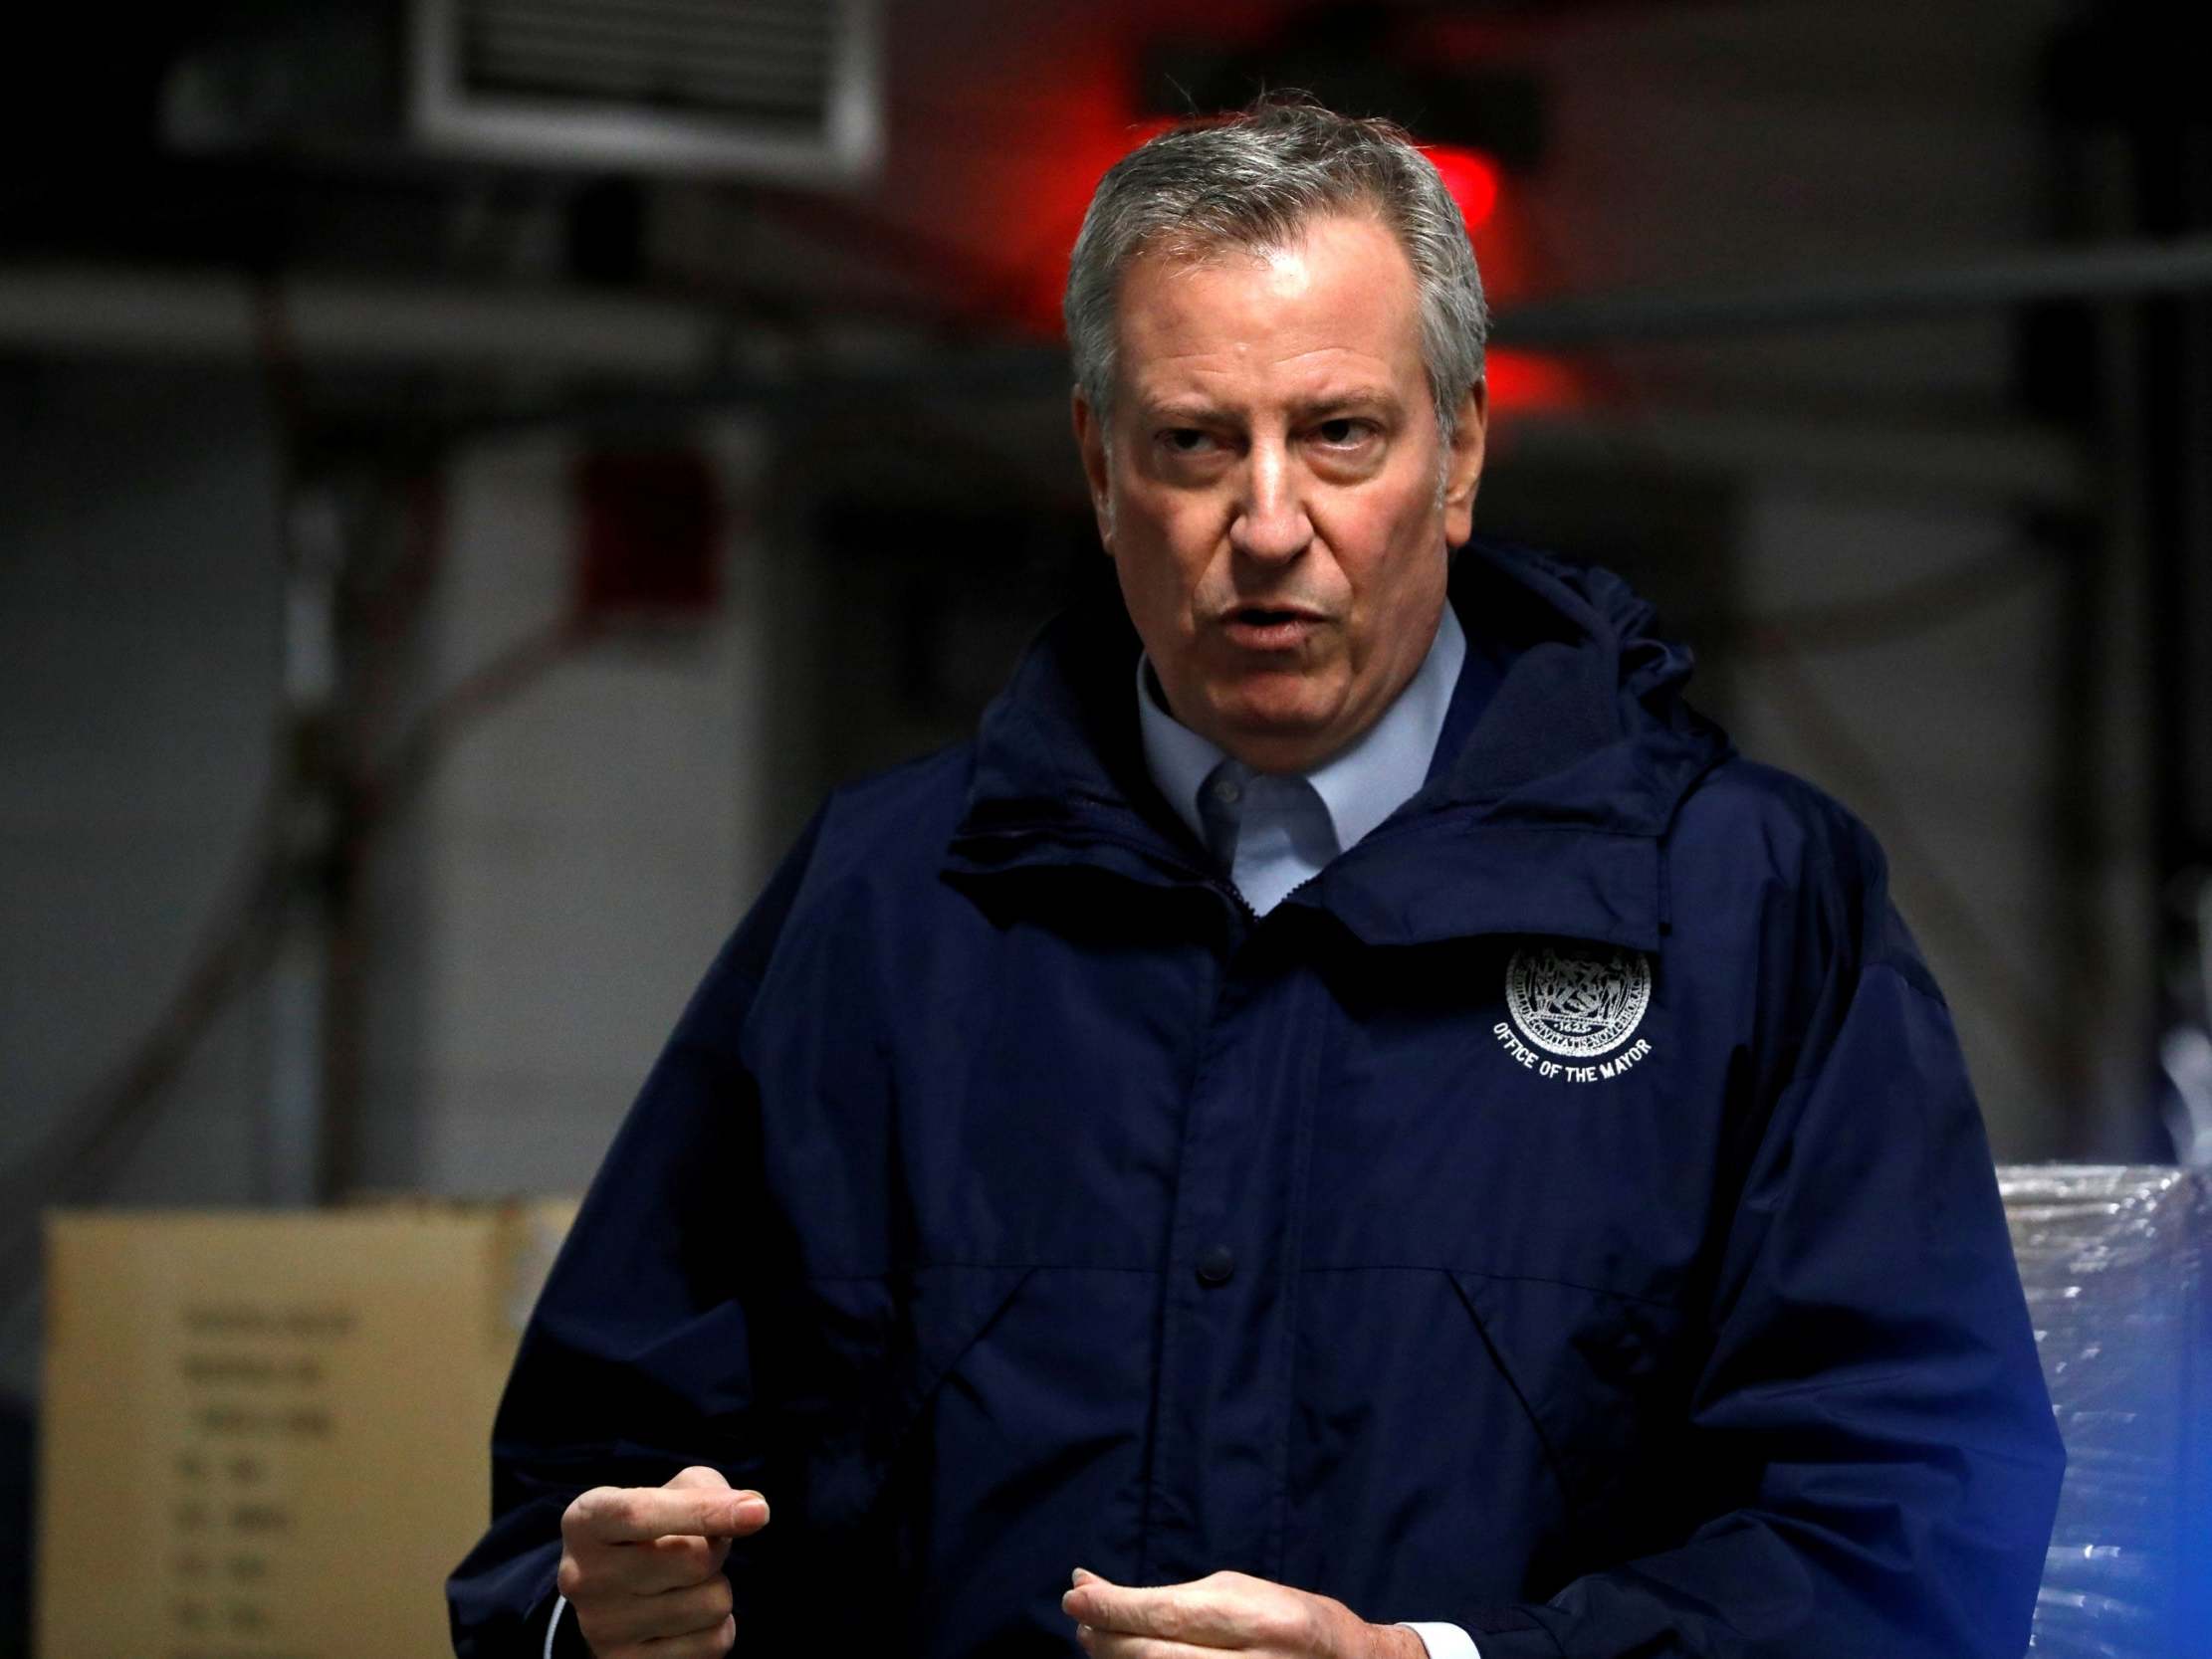 Bill de Blasio issues apology after critics said NYC mayor was 'inviting anti-Semitism' with threats to Jewish community